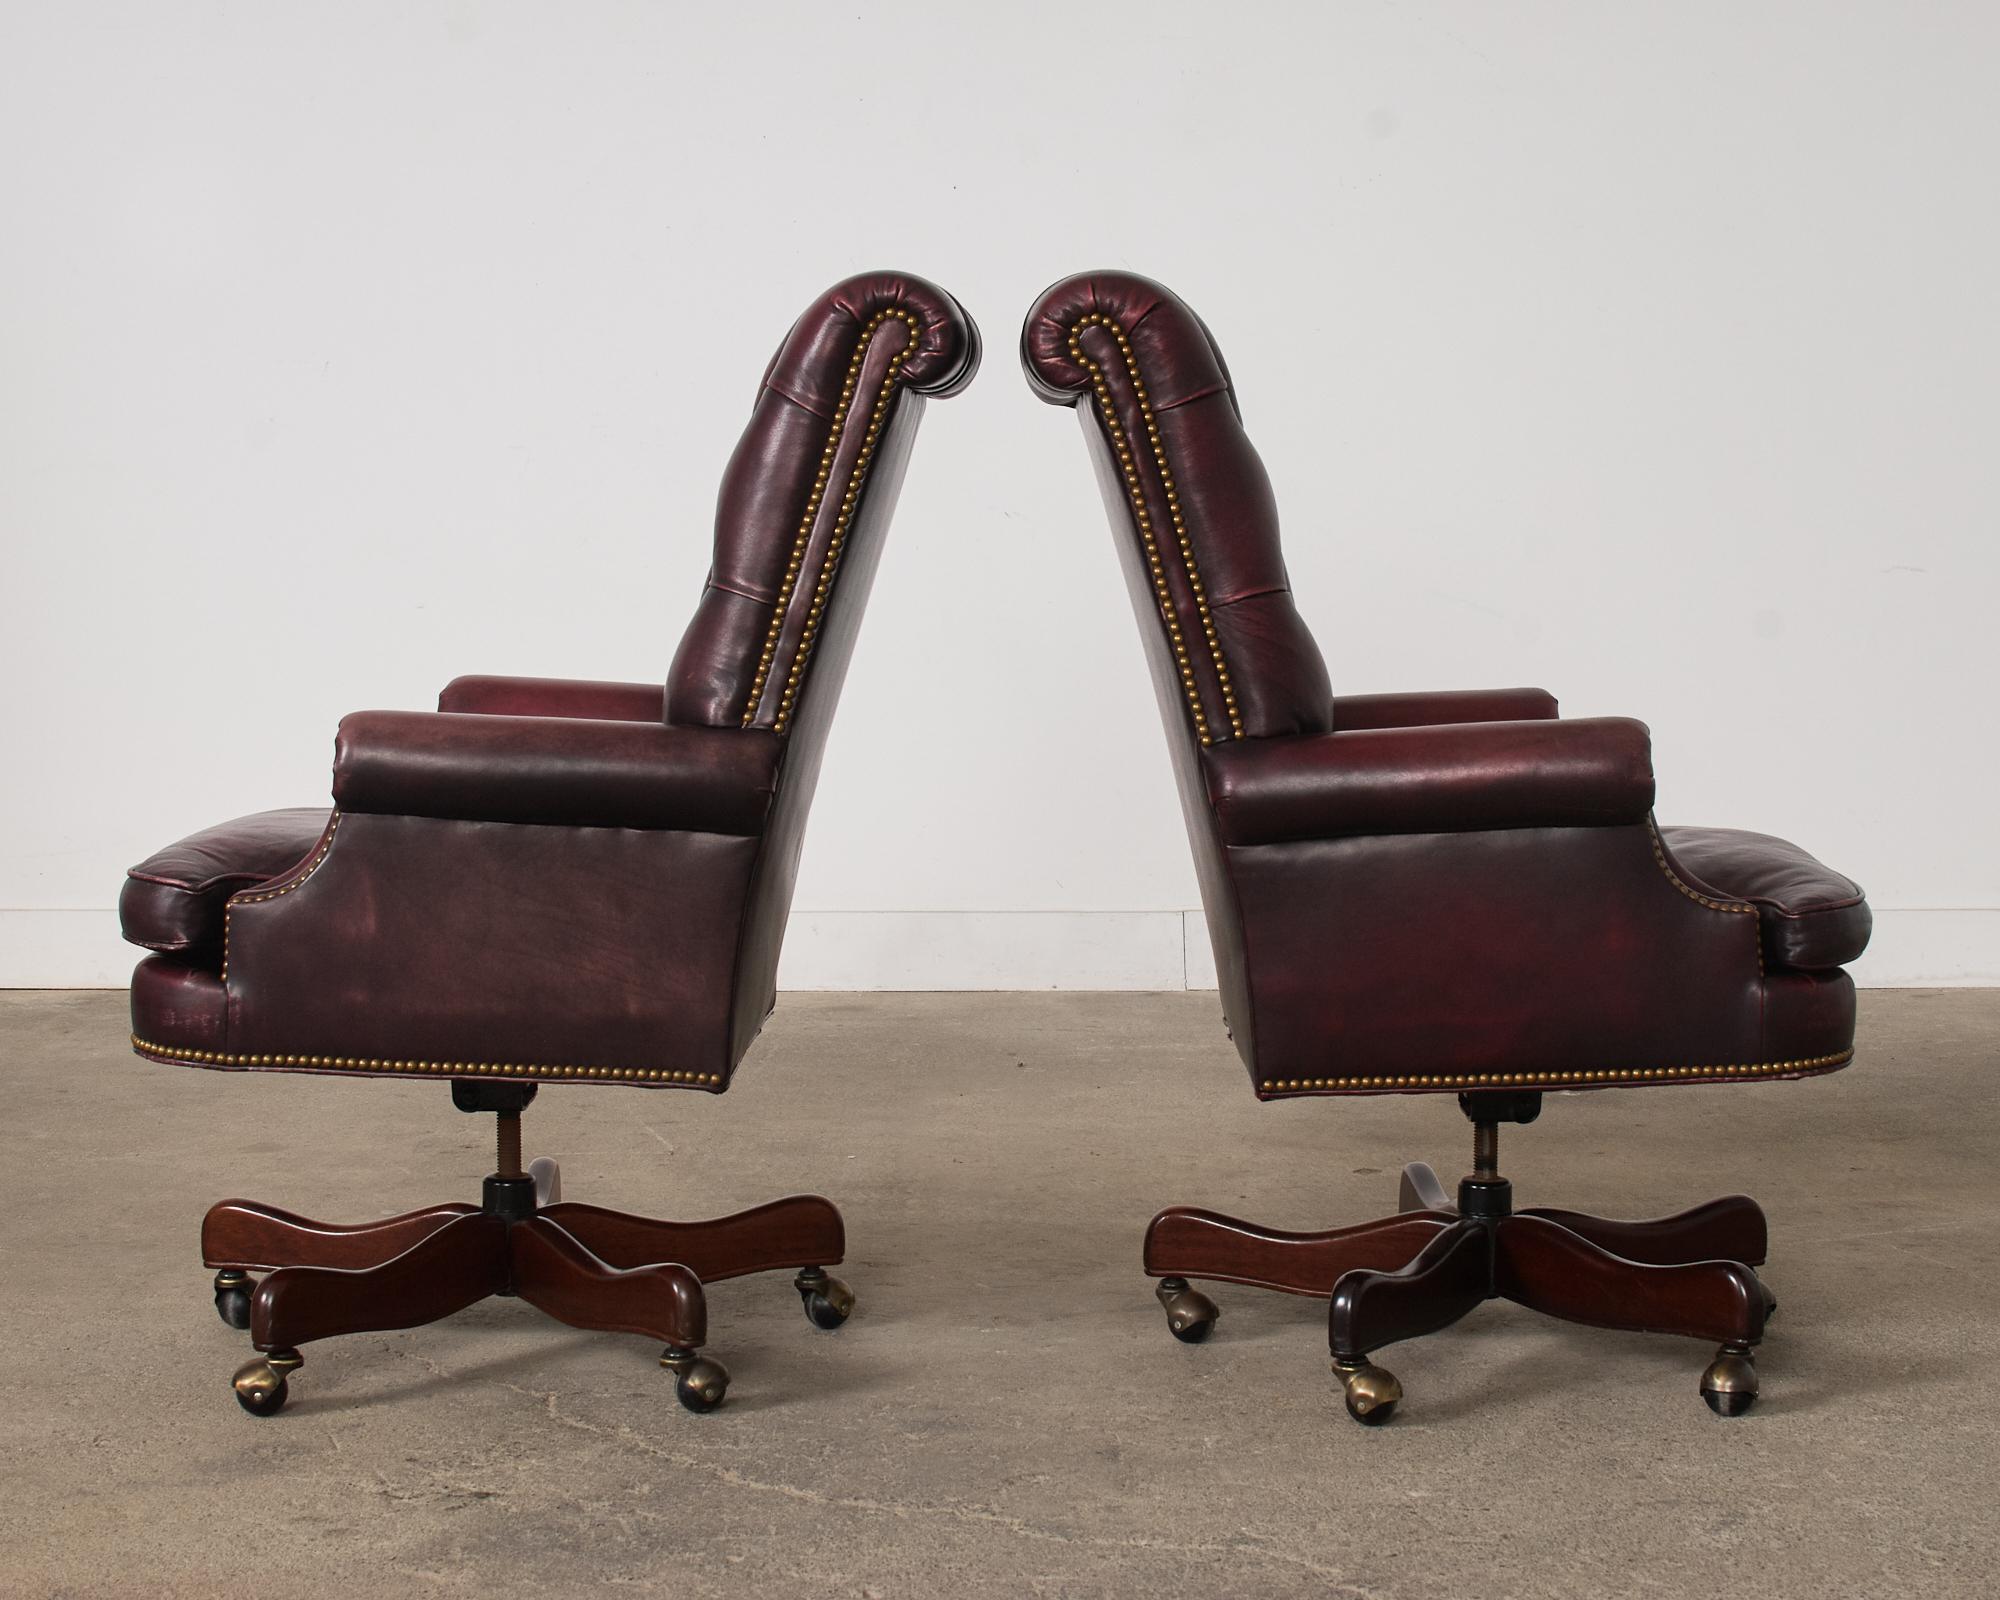 Pair of English Georgian Style Chesterfield Leather Executive Office Chairs  In Good Condition For Sale In Rio Vista, CA